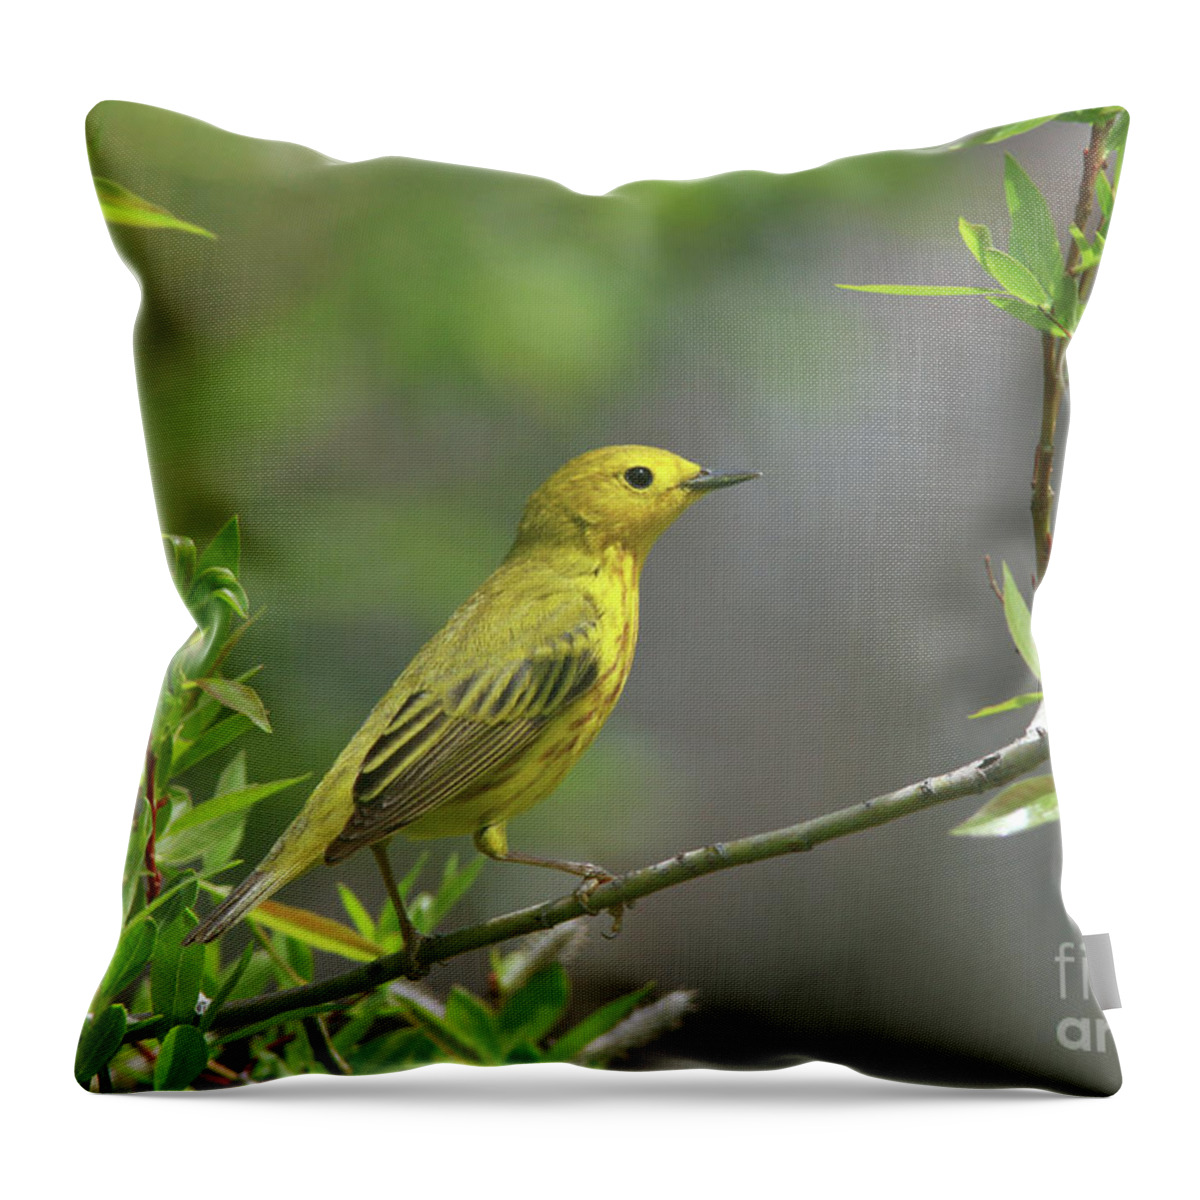 Yellow Warbler Throw Pillow featuring the photograph Yellow Warbler by Gary Wing